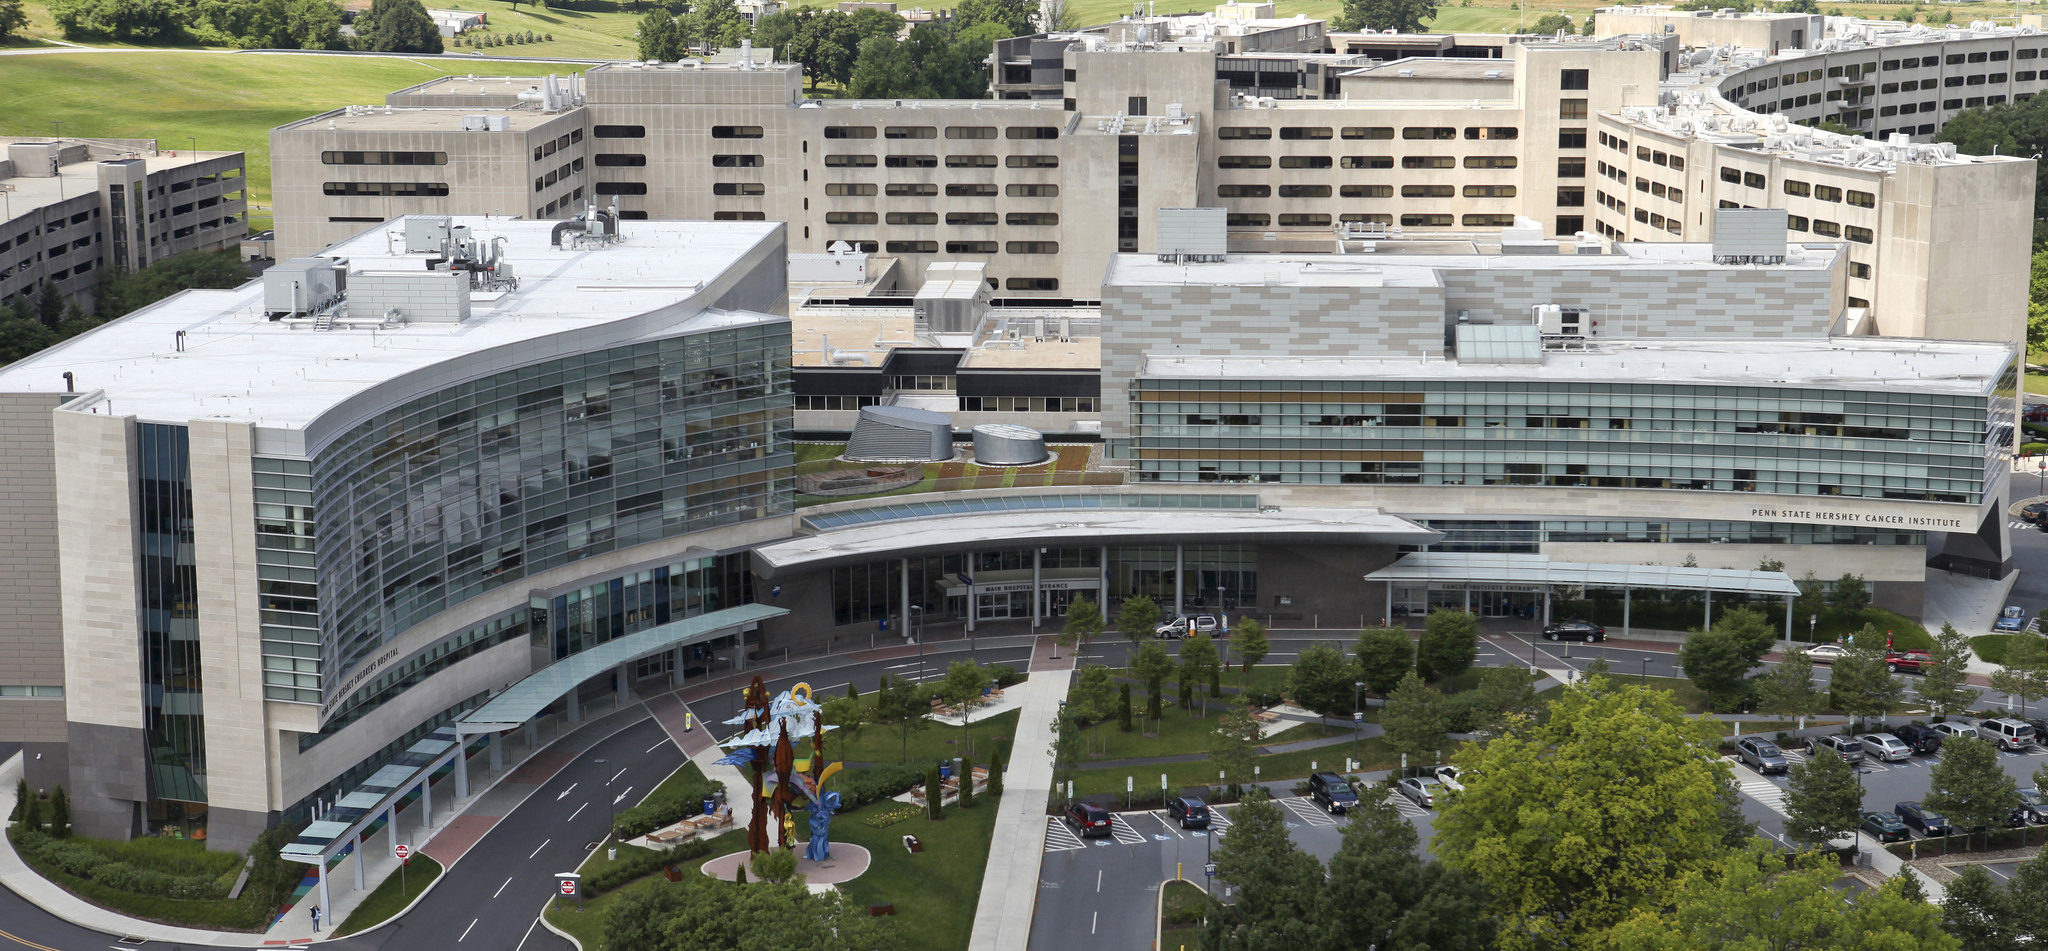 Aerial photograph of the Penn State Health Milton S. Hershey Medical Center